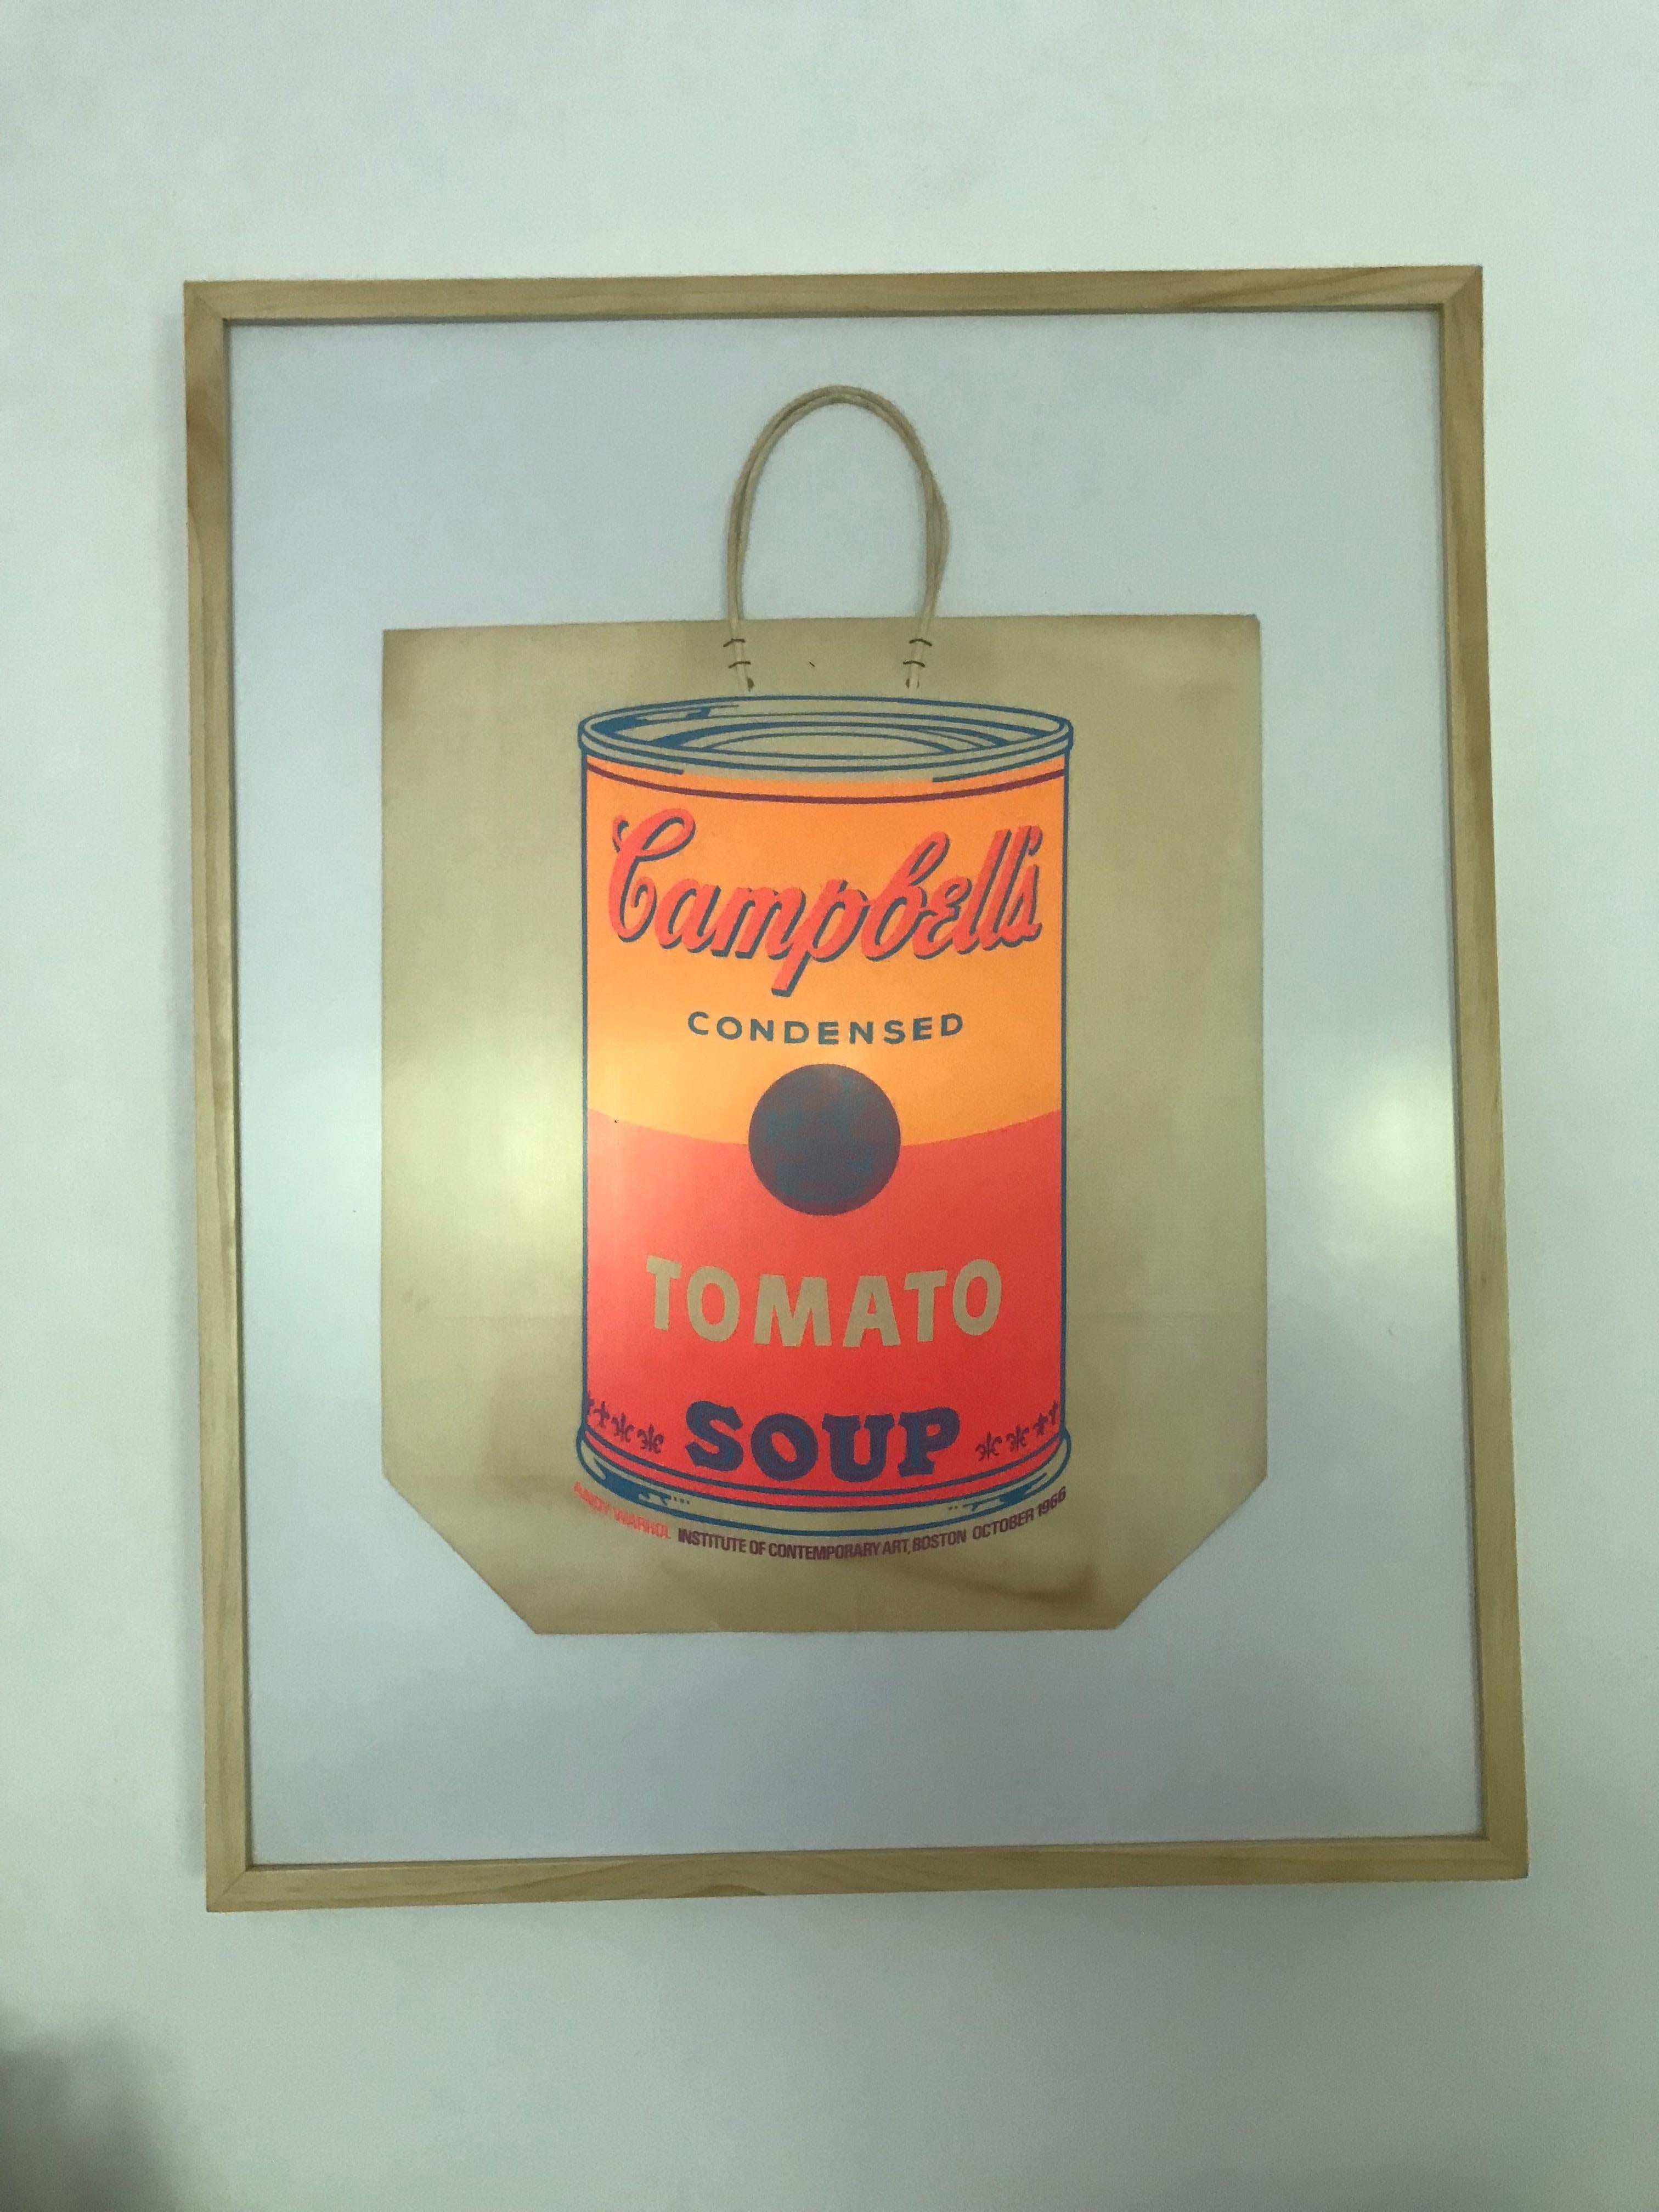 1928 -1987
What can I say about Warhol that hasn't been said before.
Except that this piece of art is a fine example of his American consumer culture aesthetic.
Screen printed Campbell's soup can image on shopping bag. 
This was a limited production